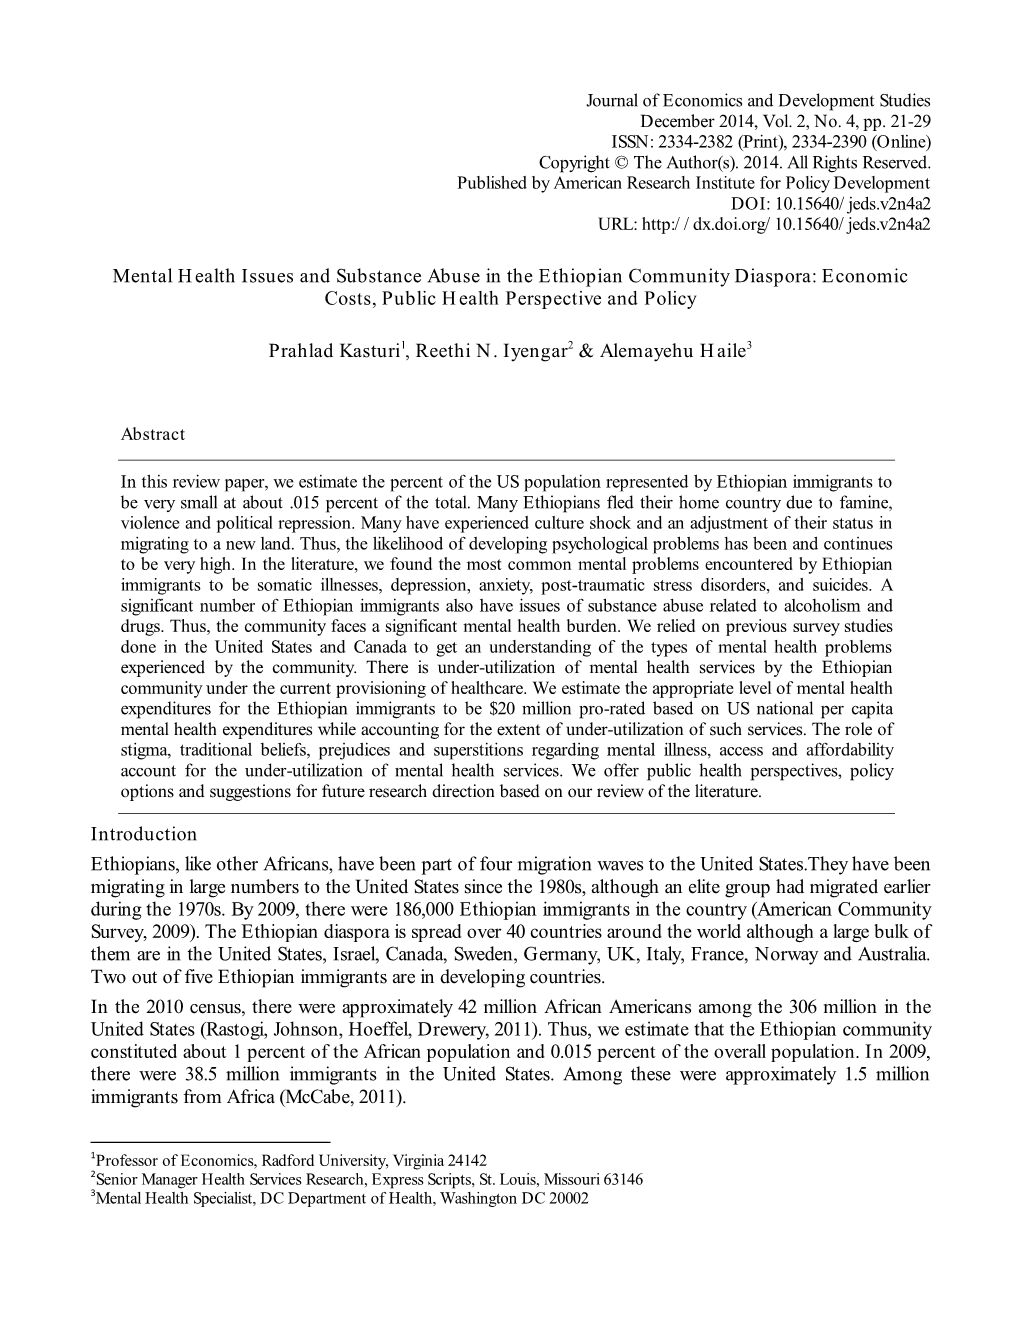 Mental Health Issues and Substance Abuse in the Ethiopian Community Diaspora: Economic Costs, Public Health Perspective and Policy